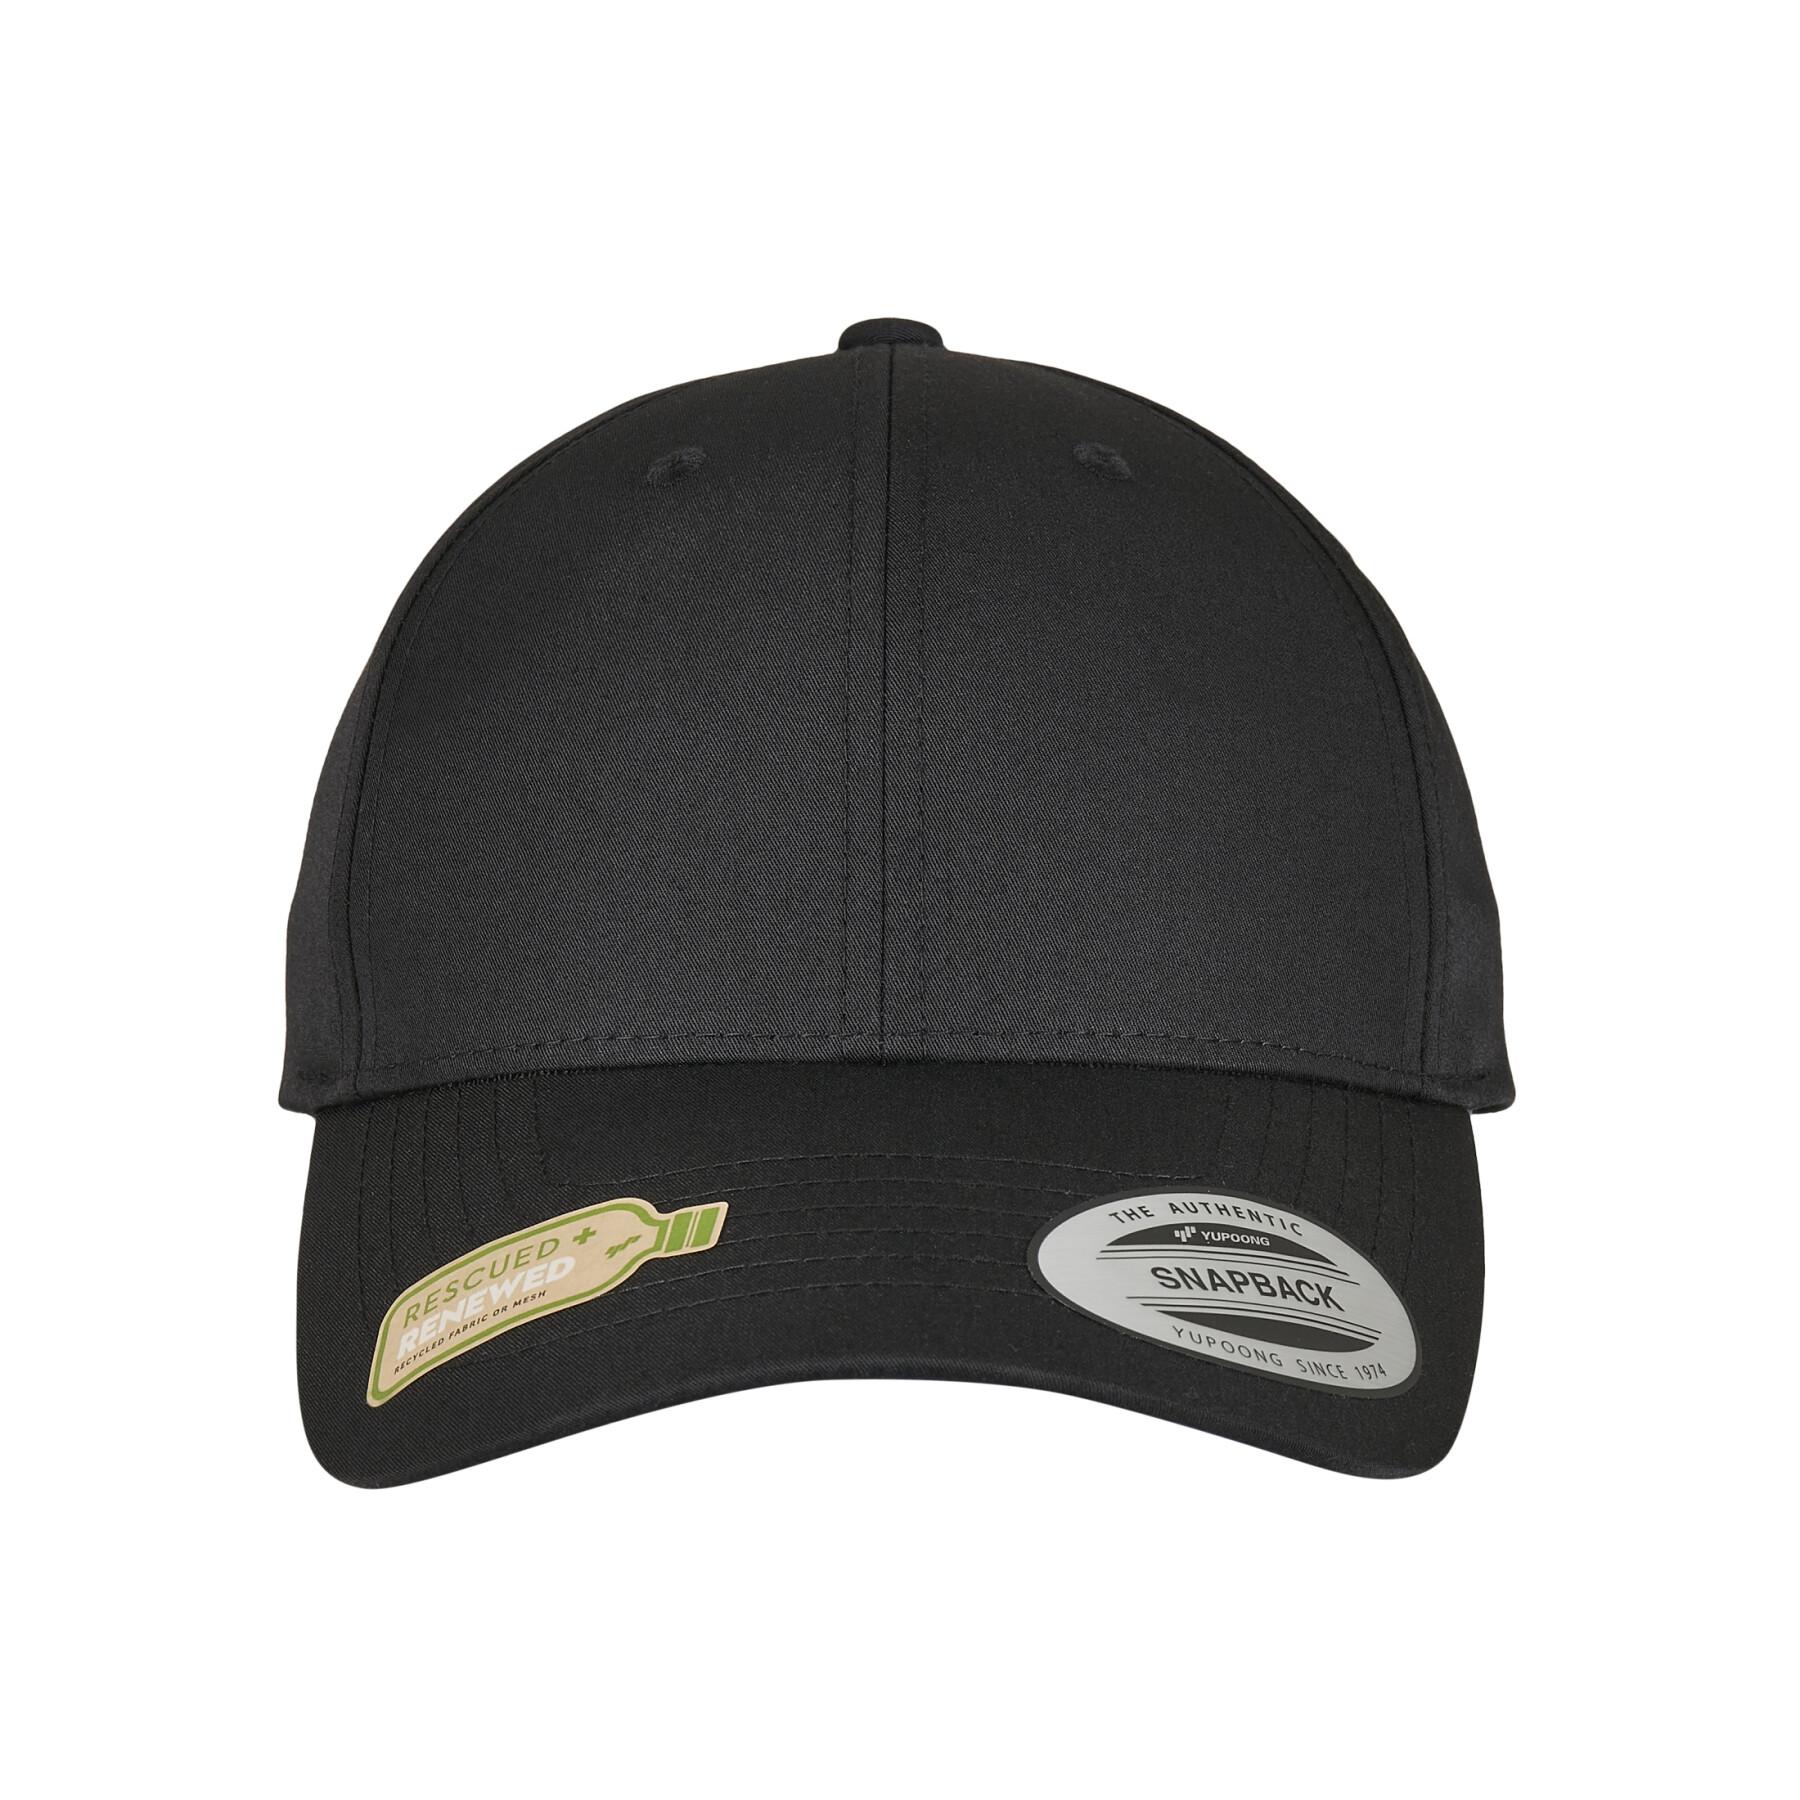 Cap Urban Classics recycled poly twill